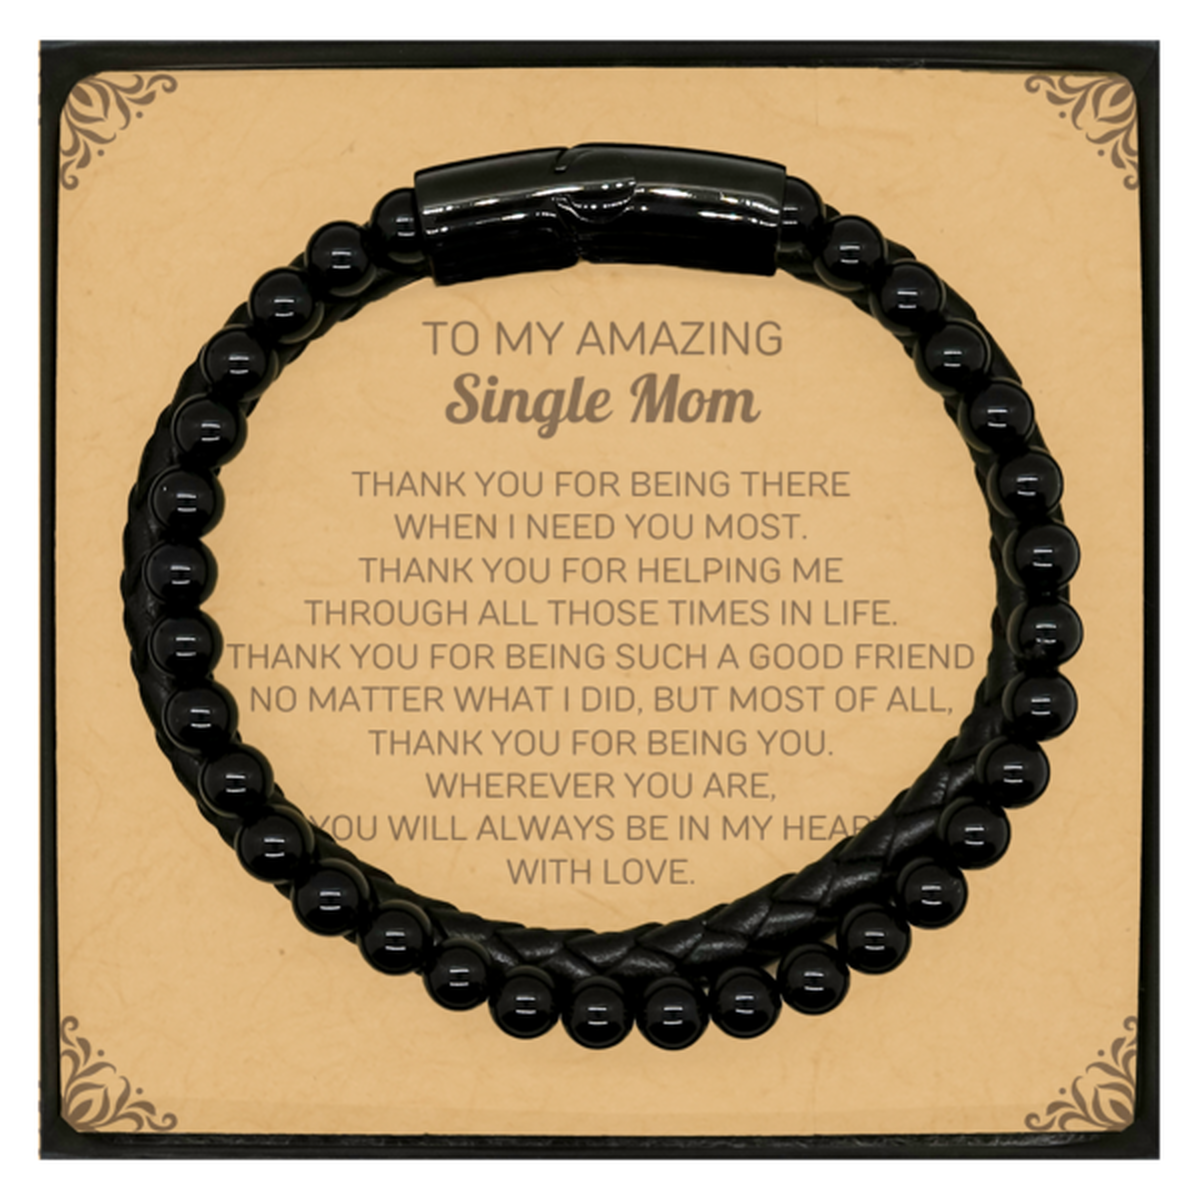 To My Amazing Single Mom Stone Leather Bracelets, Thank you for being there, Thank You Gifts For Single Mom, Birthday, Christmas Unique Gifts For Single Mom